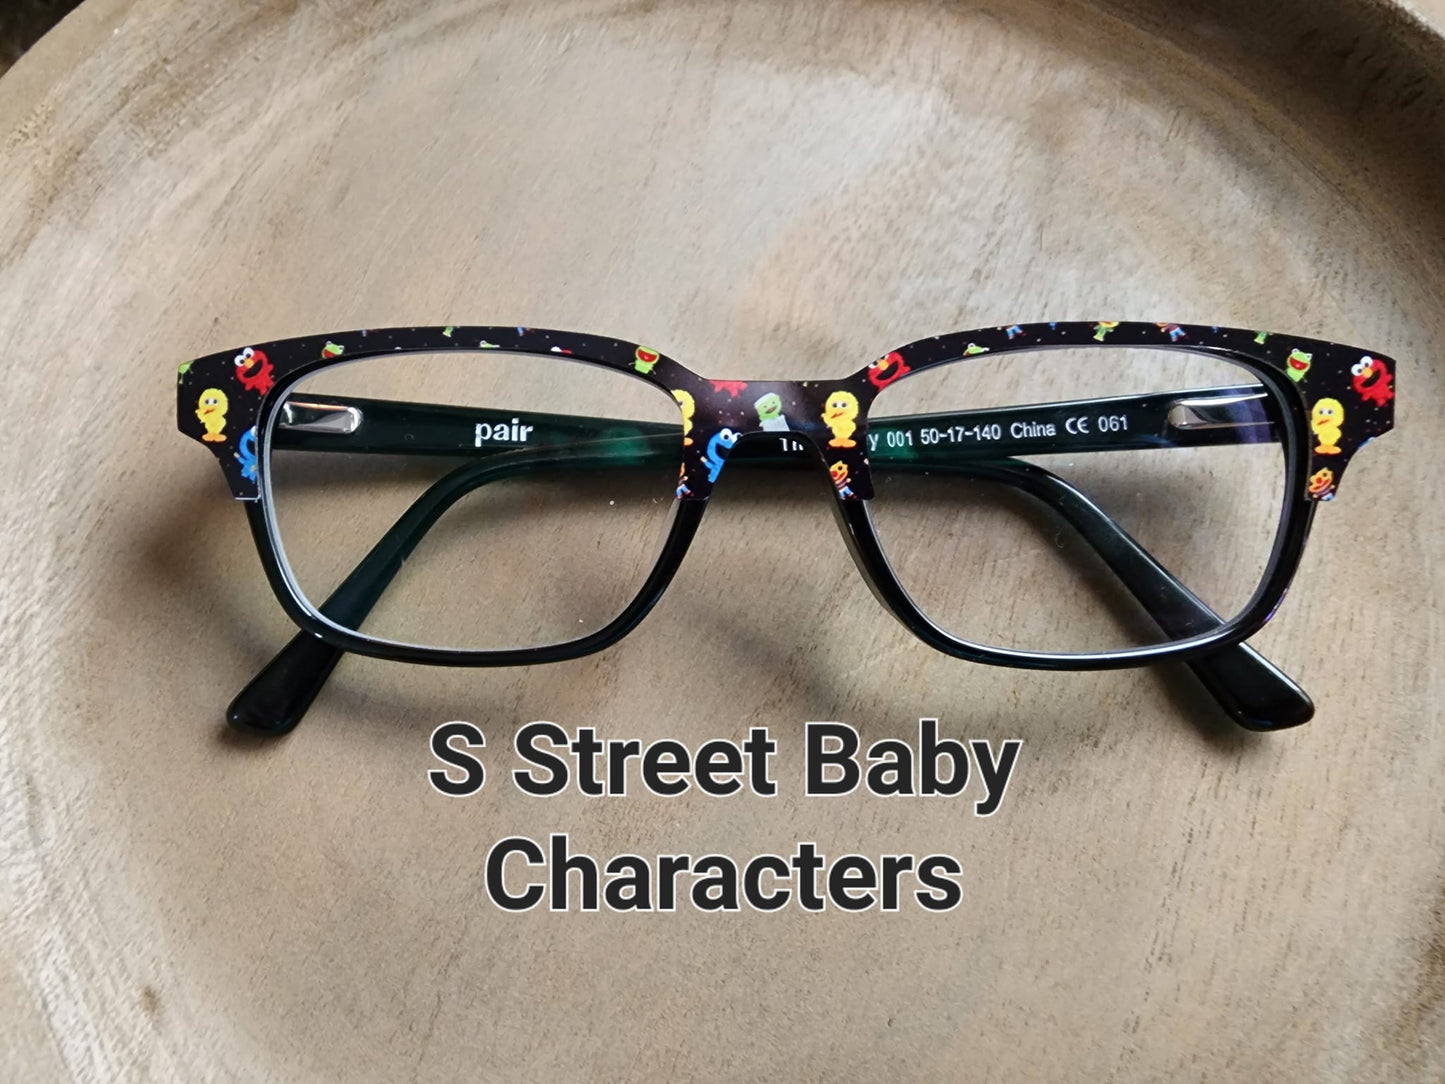 S STREET BABY CHARACTERS Eyewear Frame Toppers COMES WITH MAGNETS